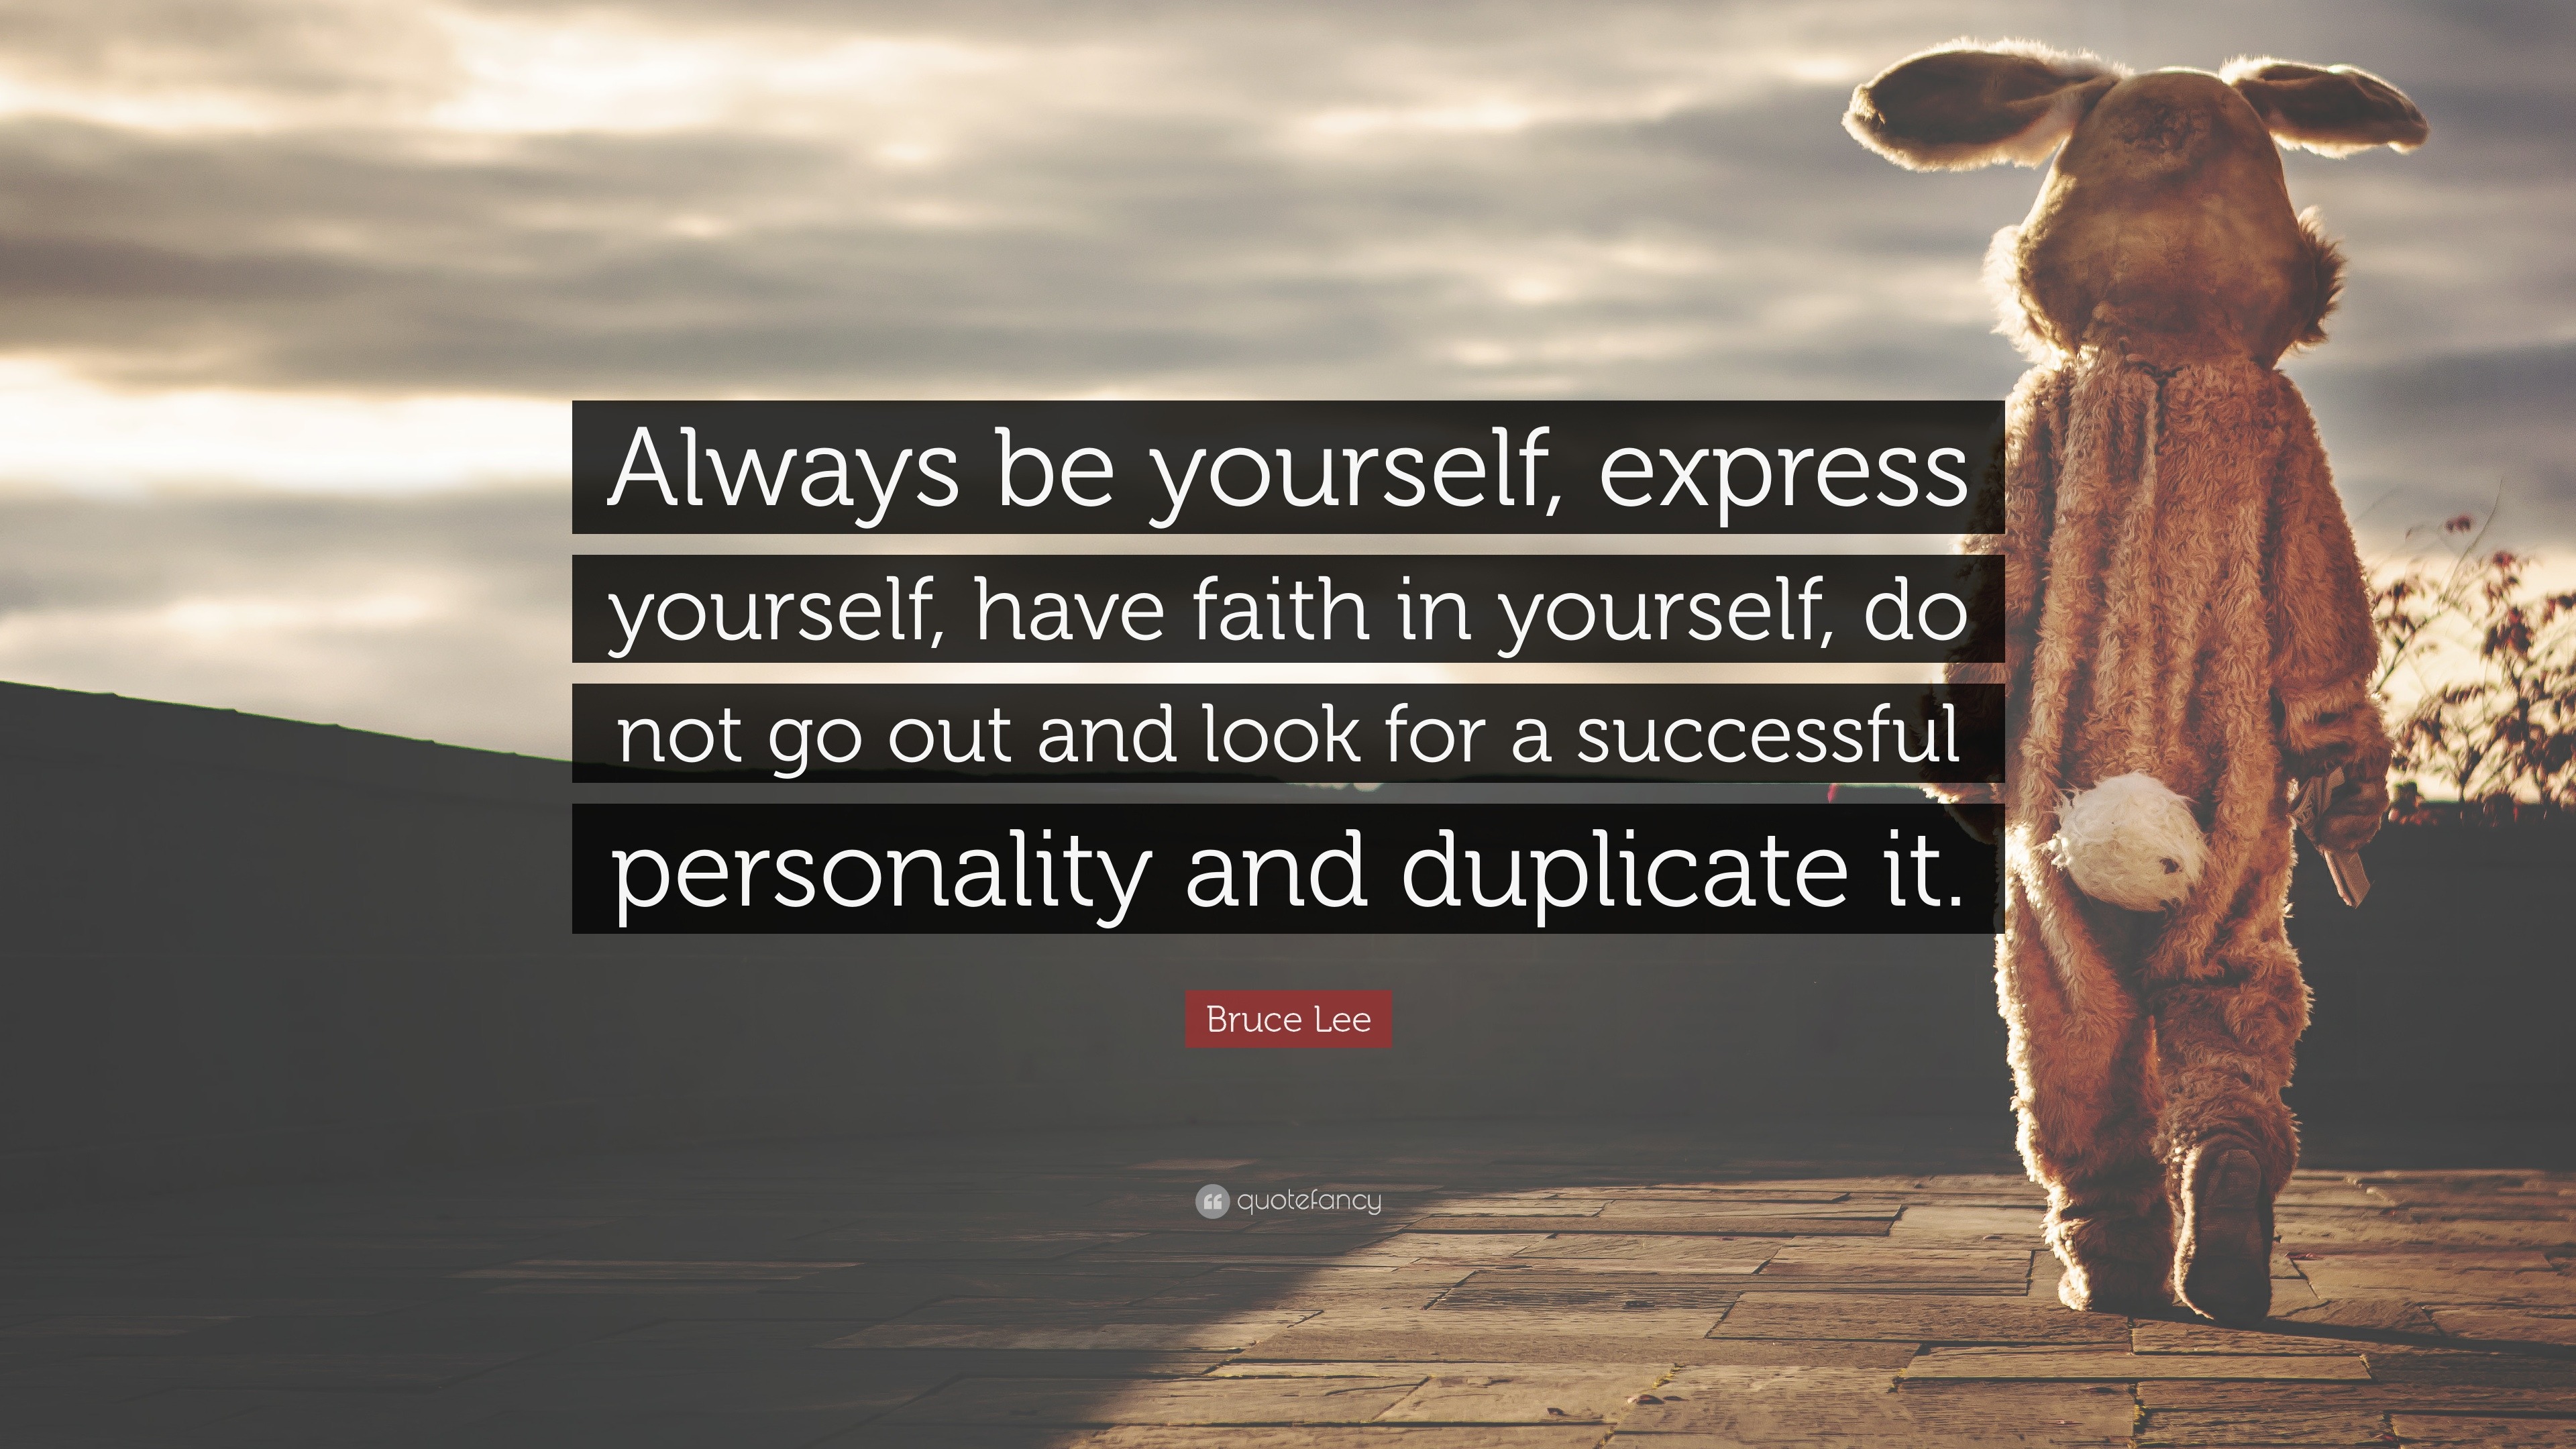 Success Quotes “Always be yourself express yourself have faith in yourself